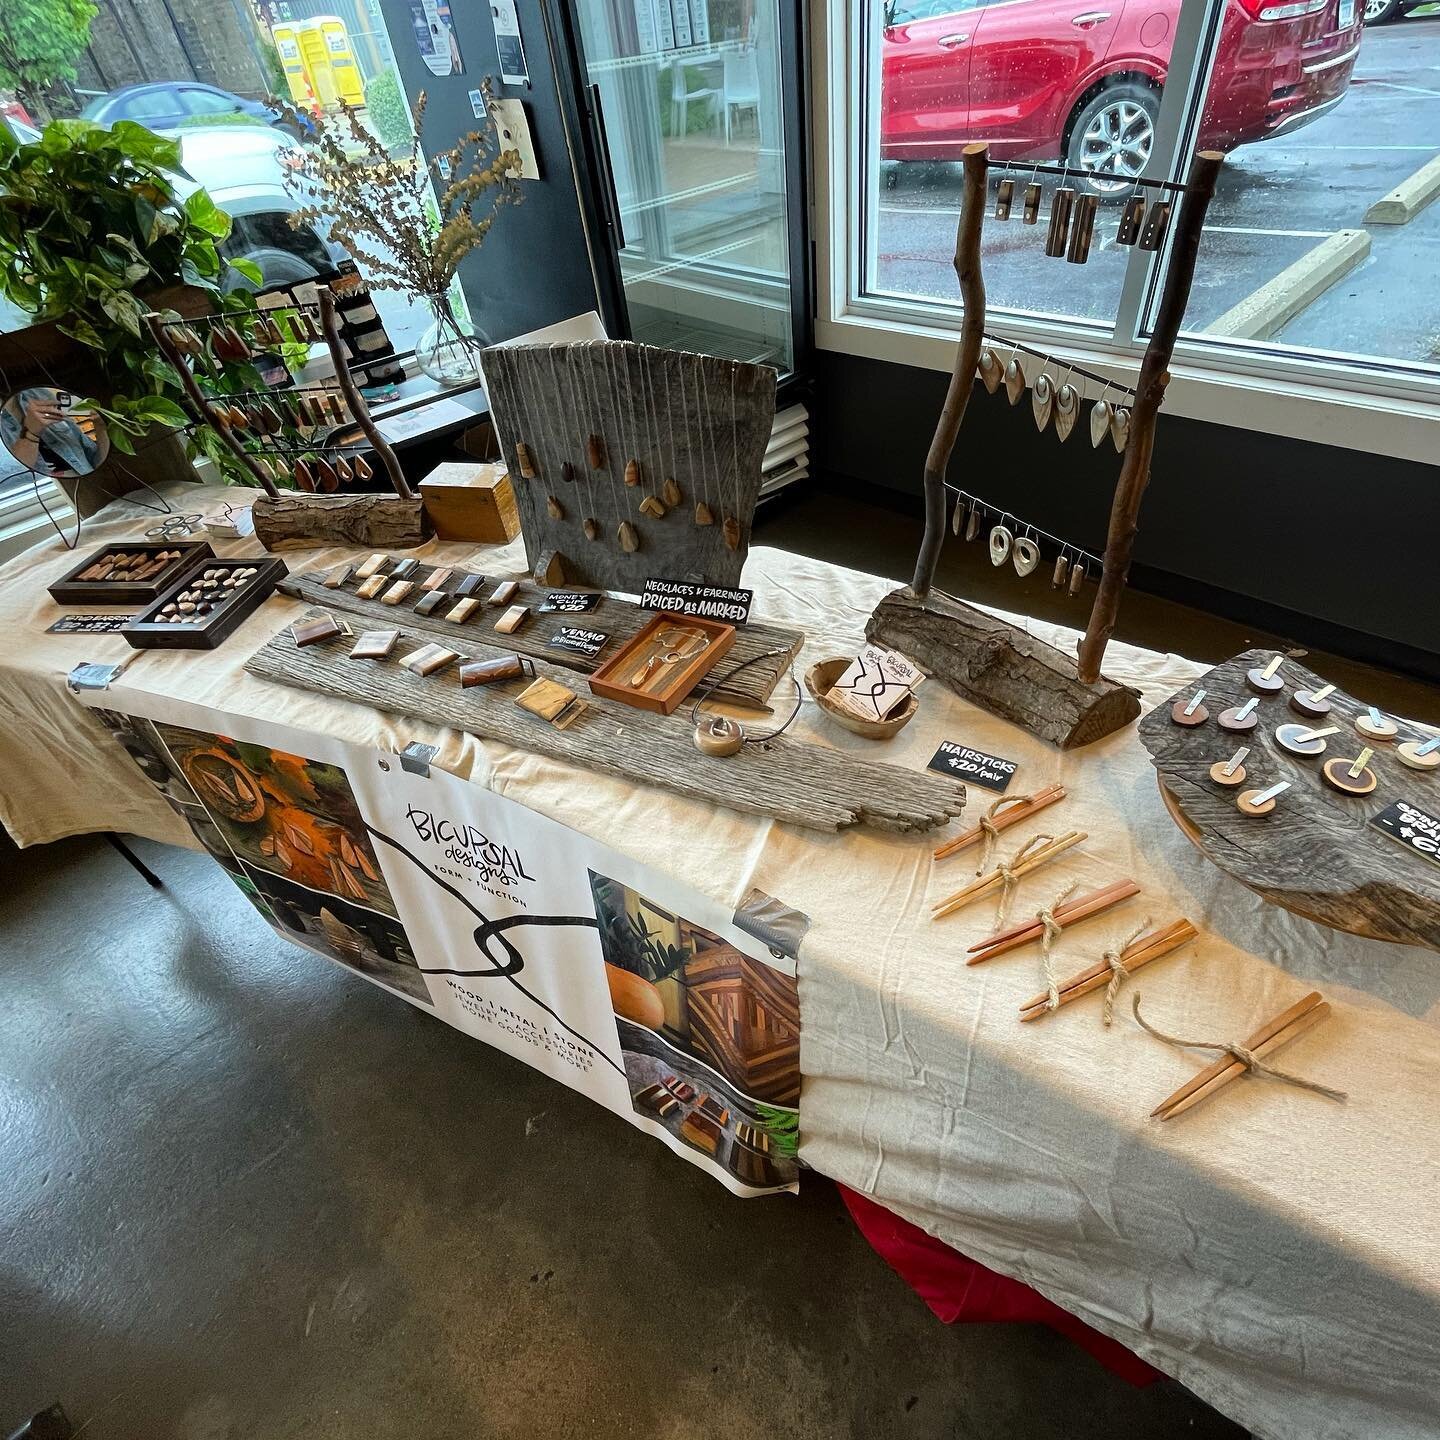 We owe a big thanks to @cityoga for having us set up our jewelry and accessories yesterday to celebrate 20 years 🎉 and @forkandfunctioncafe for housing us due to rain. They have a lovely space and delicious treats. It is always wonderful to meet new